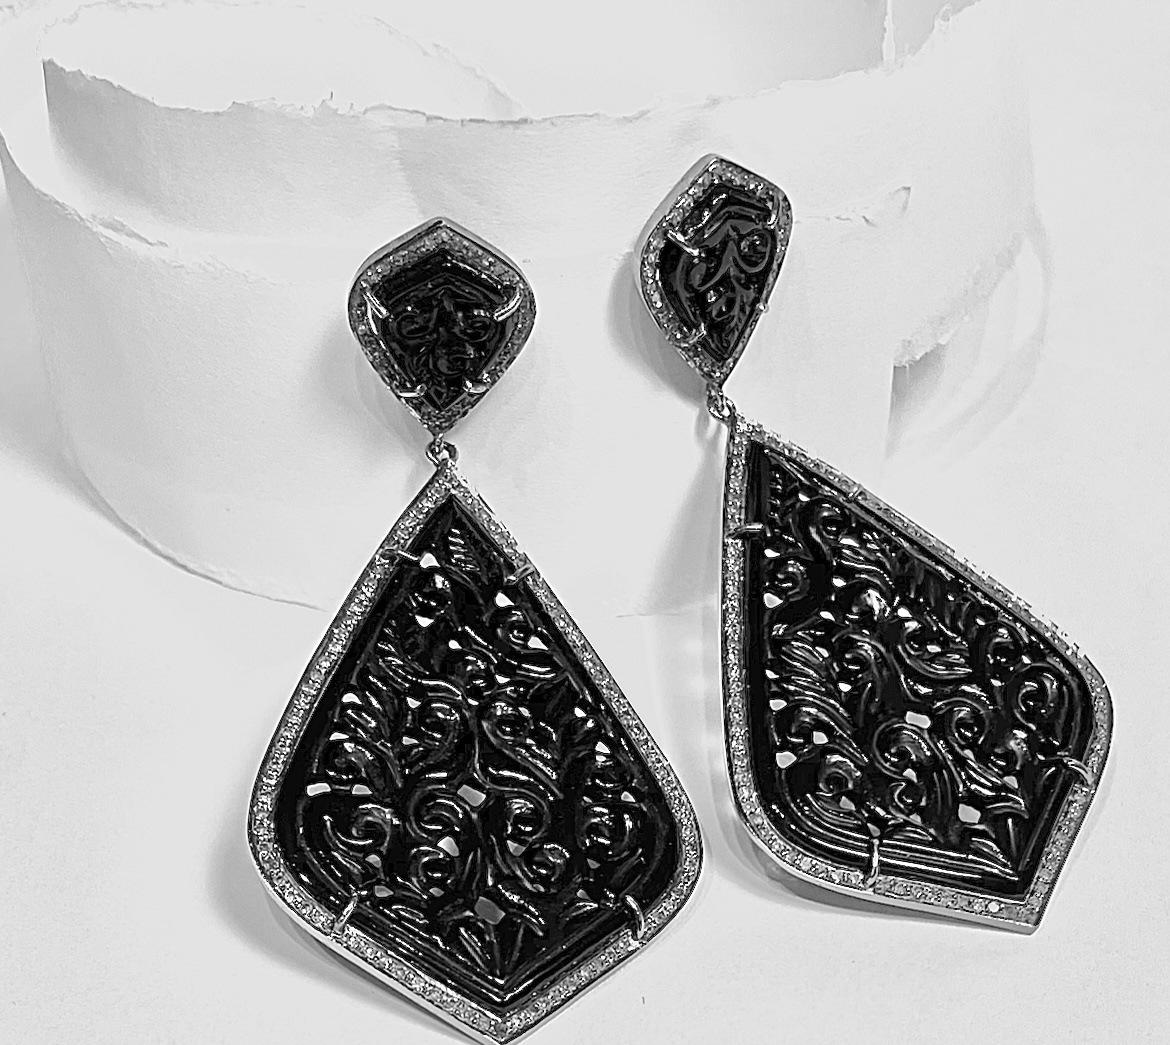 Description
Gorgeous hand-carved Black Onyx earrings, surrounded with pave diamonds. Great for day or night.
Item # E3225
	
Materials and Weight
Black Onyx, 39 x 57mm kite shape, 67 carats.
Pave diamonds, 1.67 carats.
Posts with jumbo backs, 14k